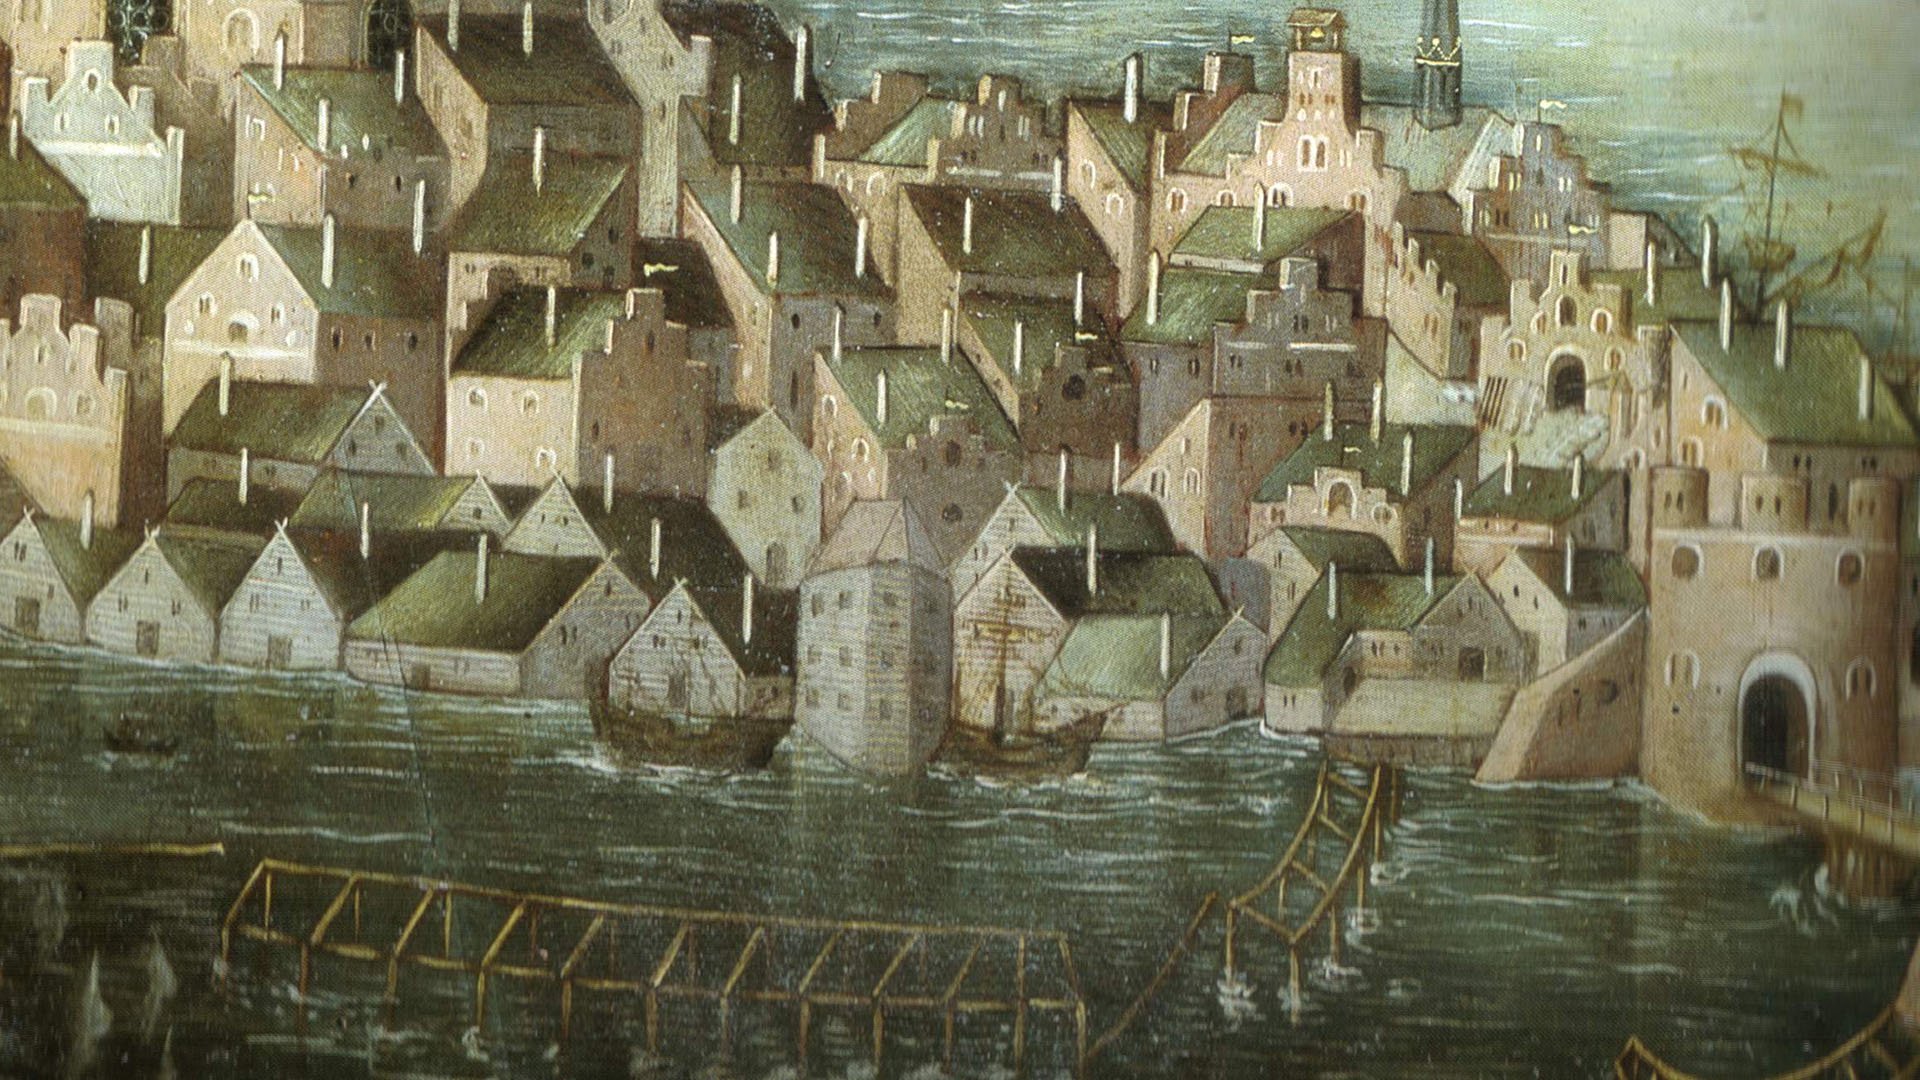  Detail of Vädersolstavlan, The Sundog Painting, from 1535, but this is a copy from 1636. The detail shows the southwestern part of what today is Gamla stan, the Old Town. The bridge and gate to the right is the southern entrance to the city, today k